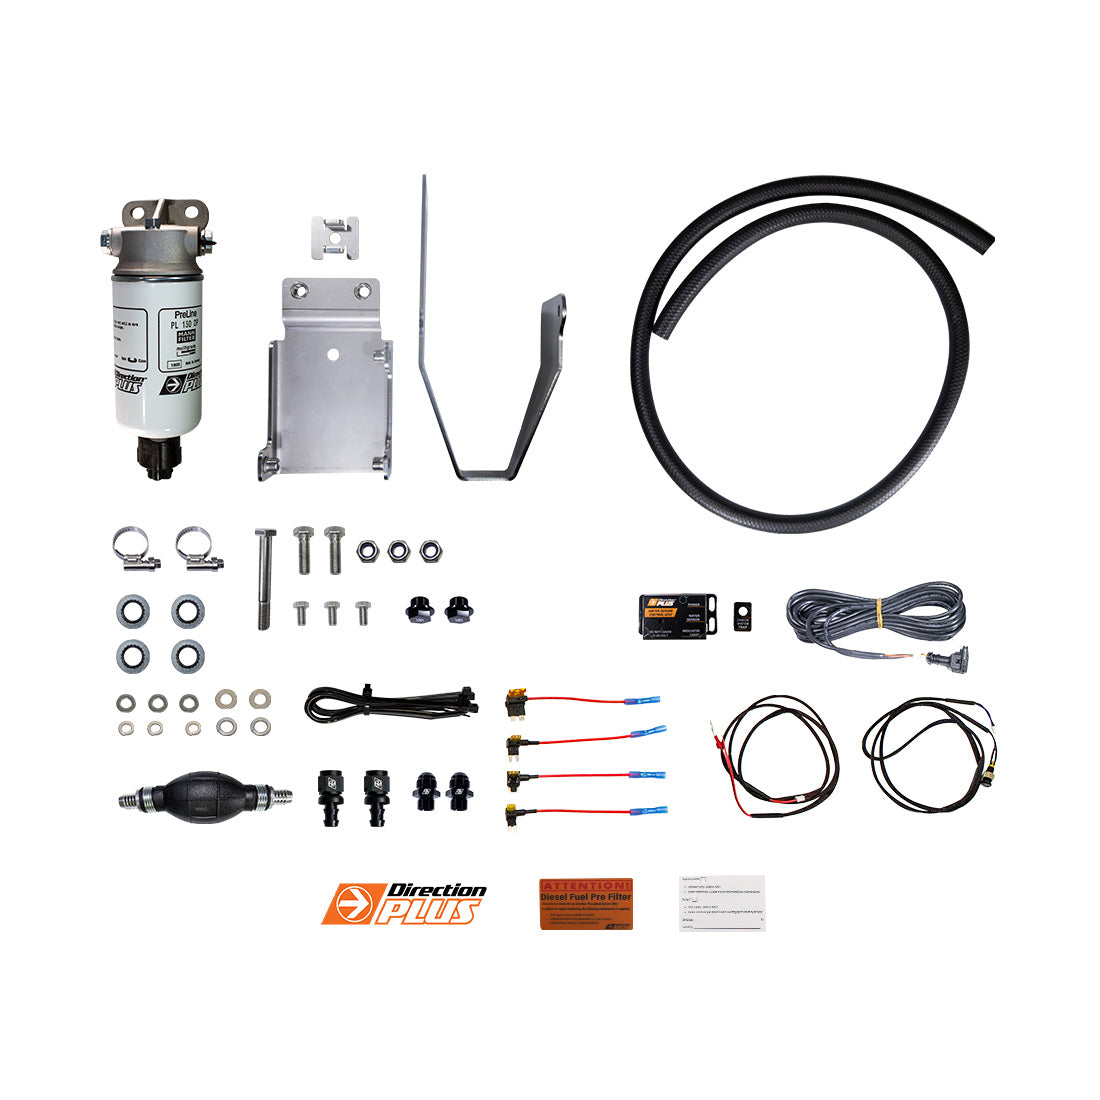 Land Cruiser 300 Series Pre-Filter and Catch Can - Combo Kit - With In Cab Alarm - Common Rail Cowboys